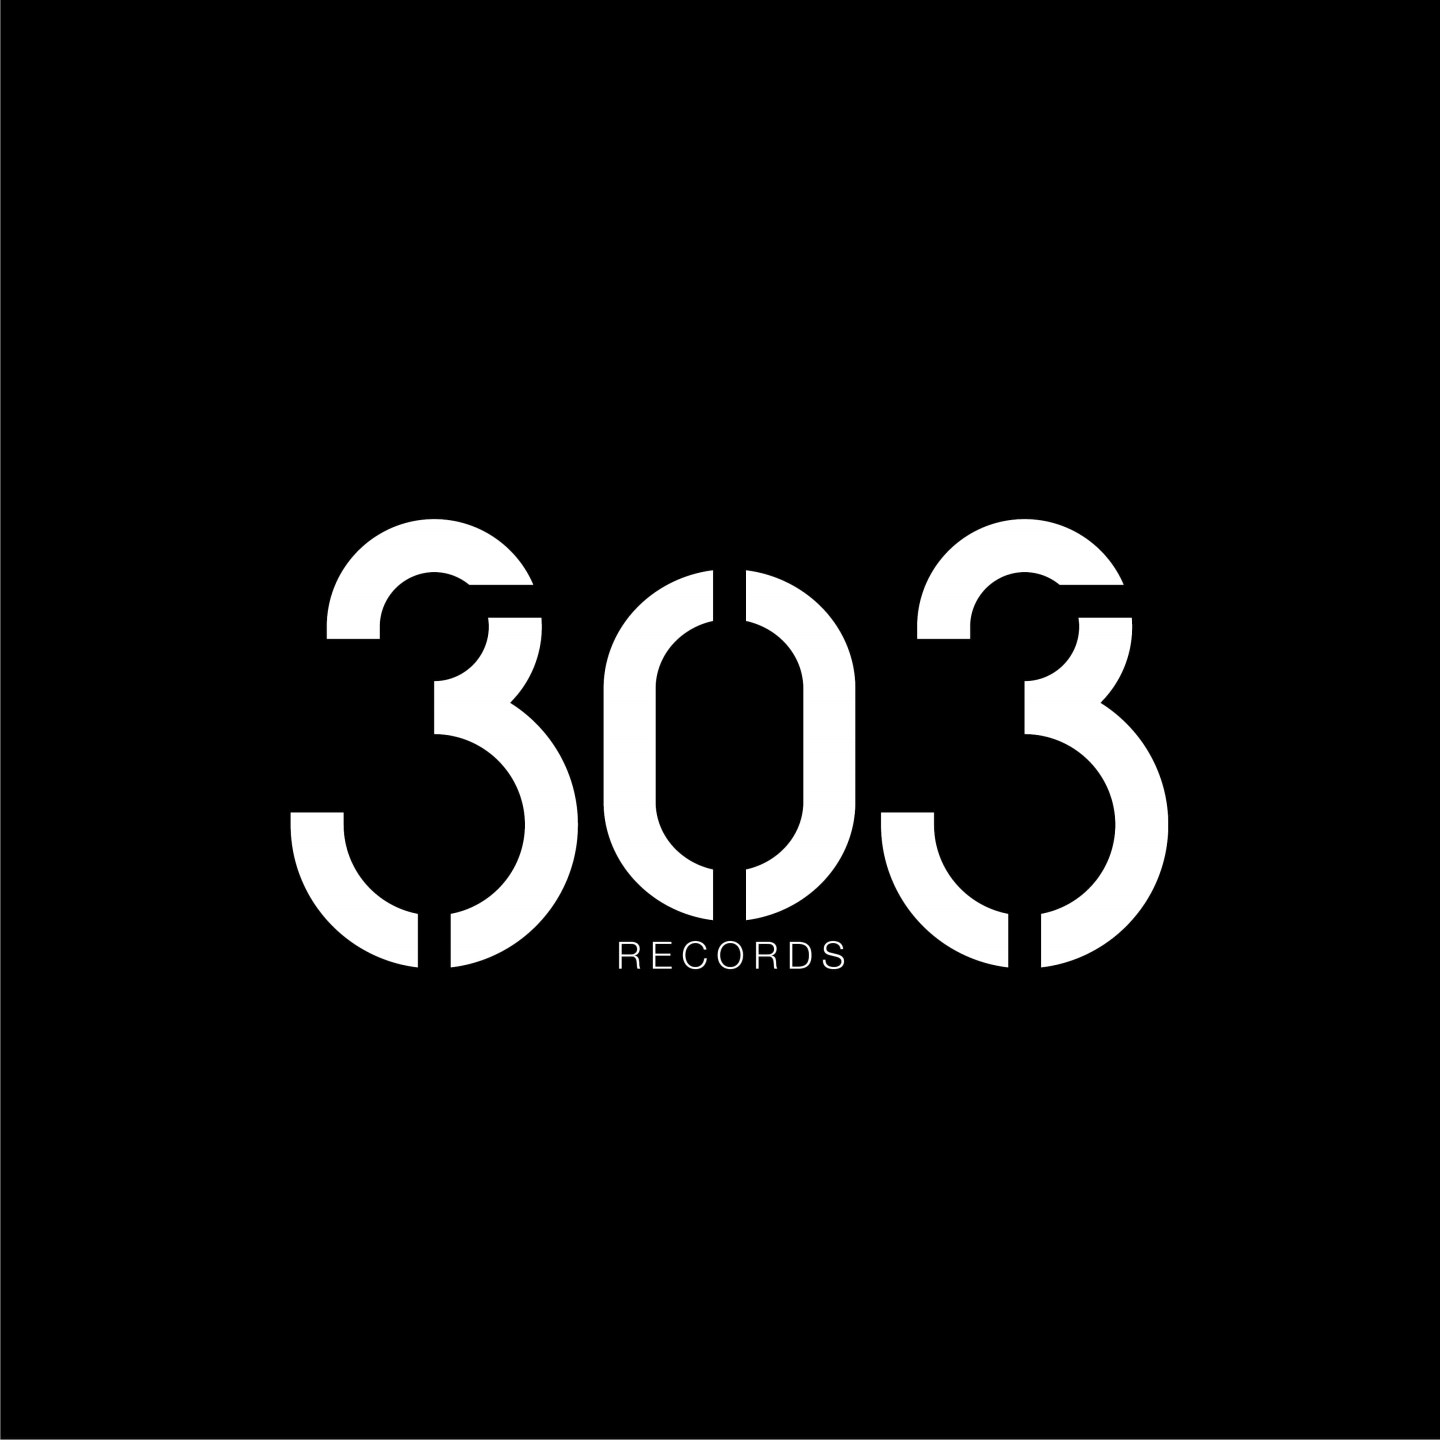 303 Records · Upcoming Events, Tickets & News